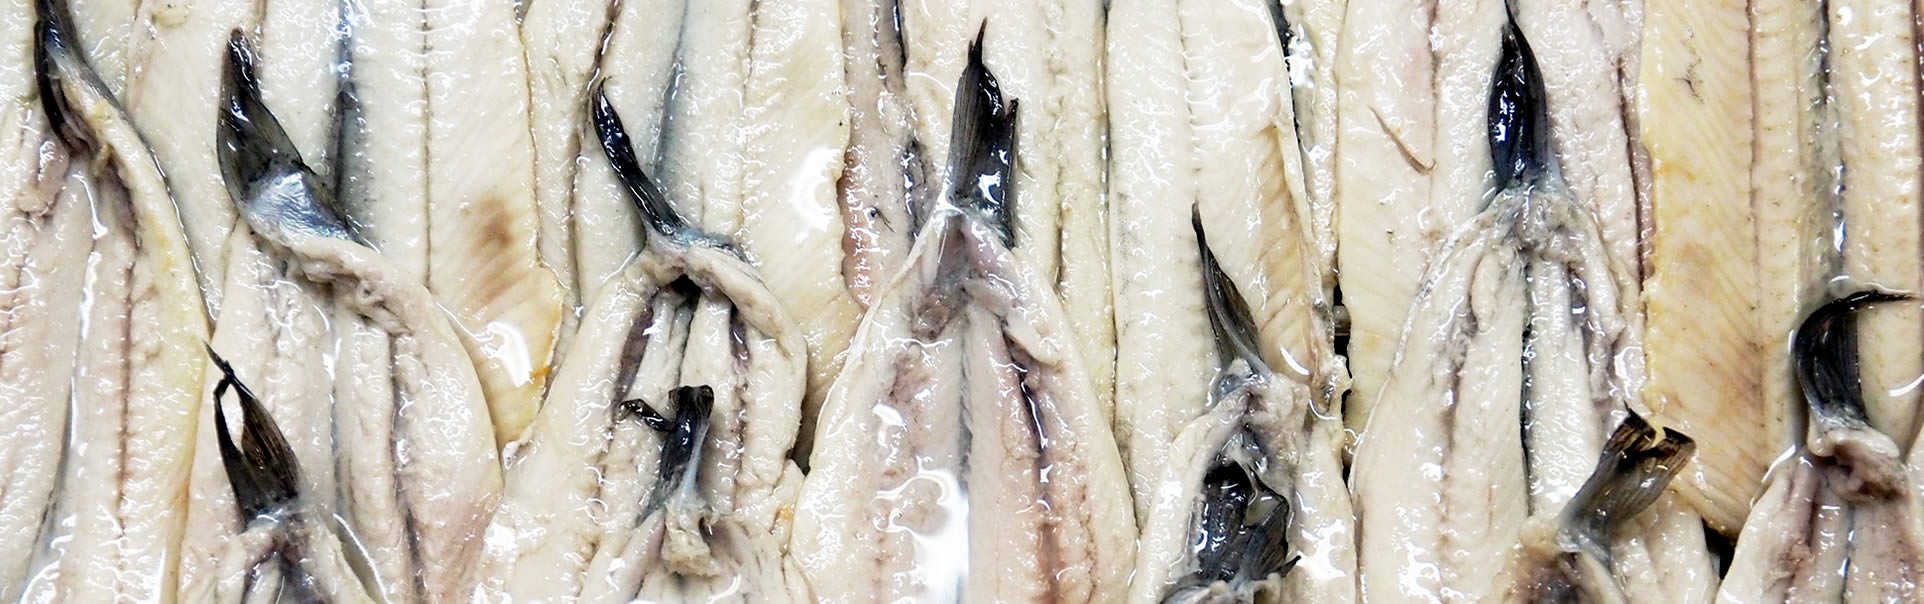 Fresh anchovies cured traditionally in vinegar